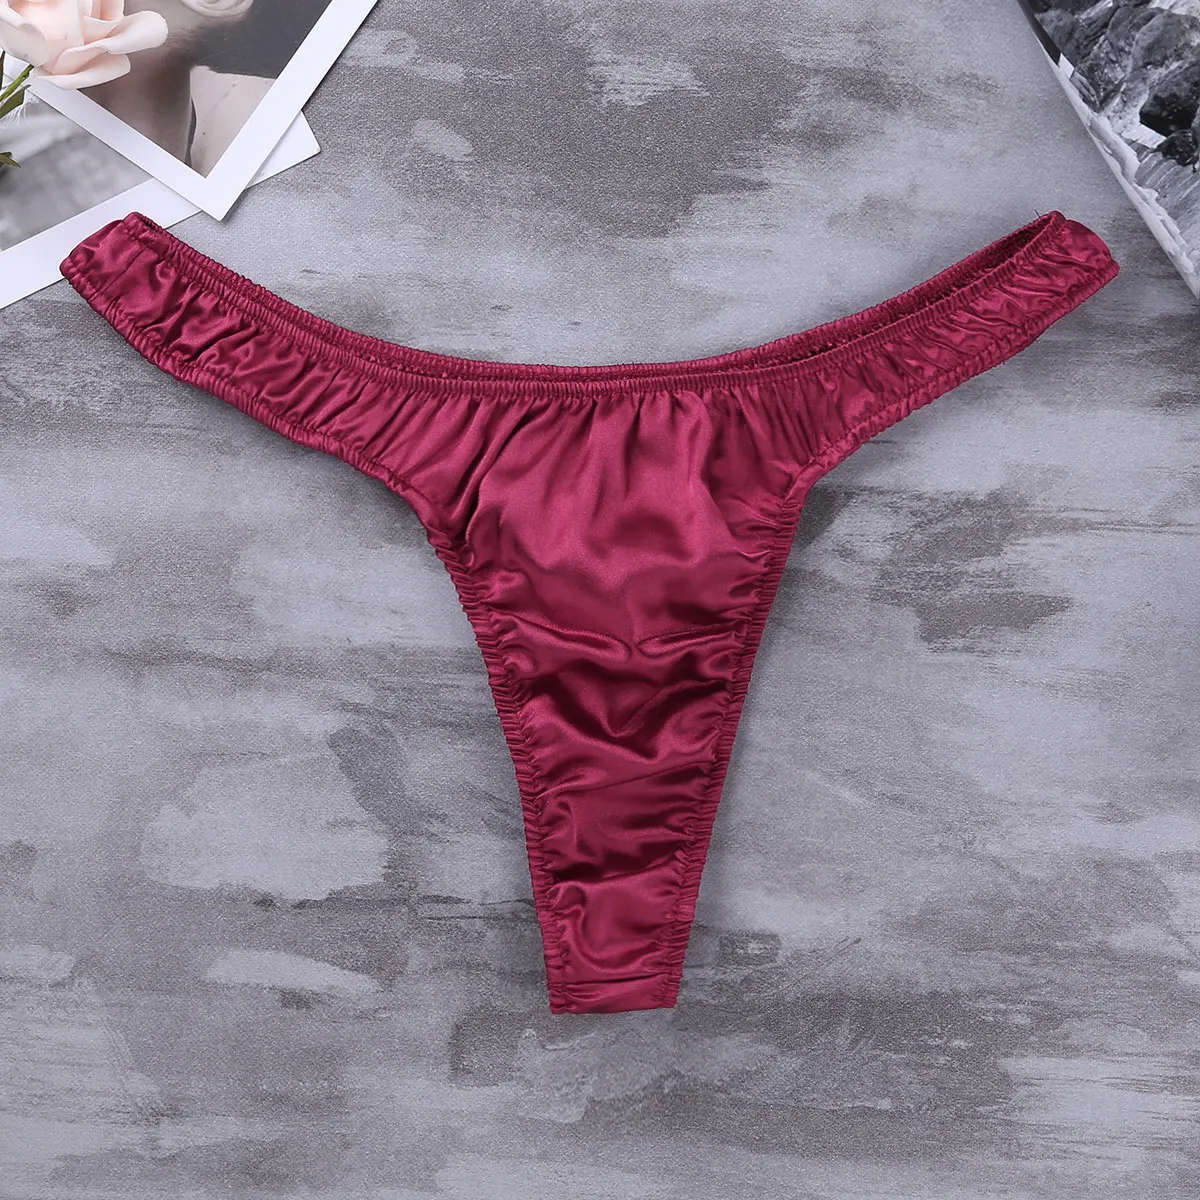 

Mens Lingerie Thongs Panties Soft Shiny Ruffled Low Rise Sexy Bikini Thong Underwear Panties Very Soft And Breathable Underpants